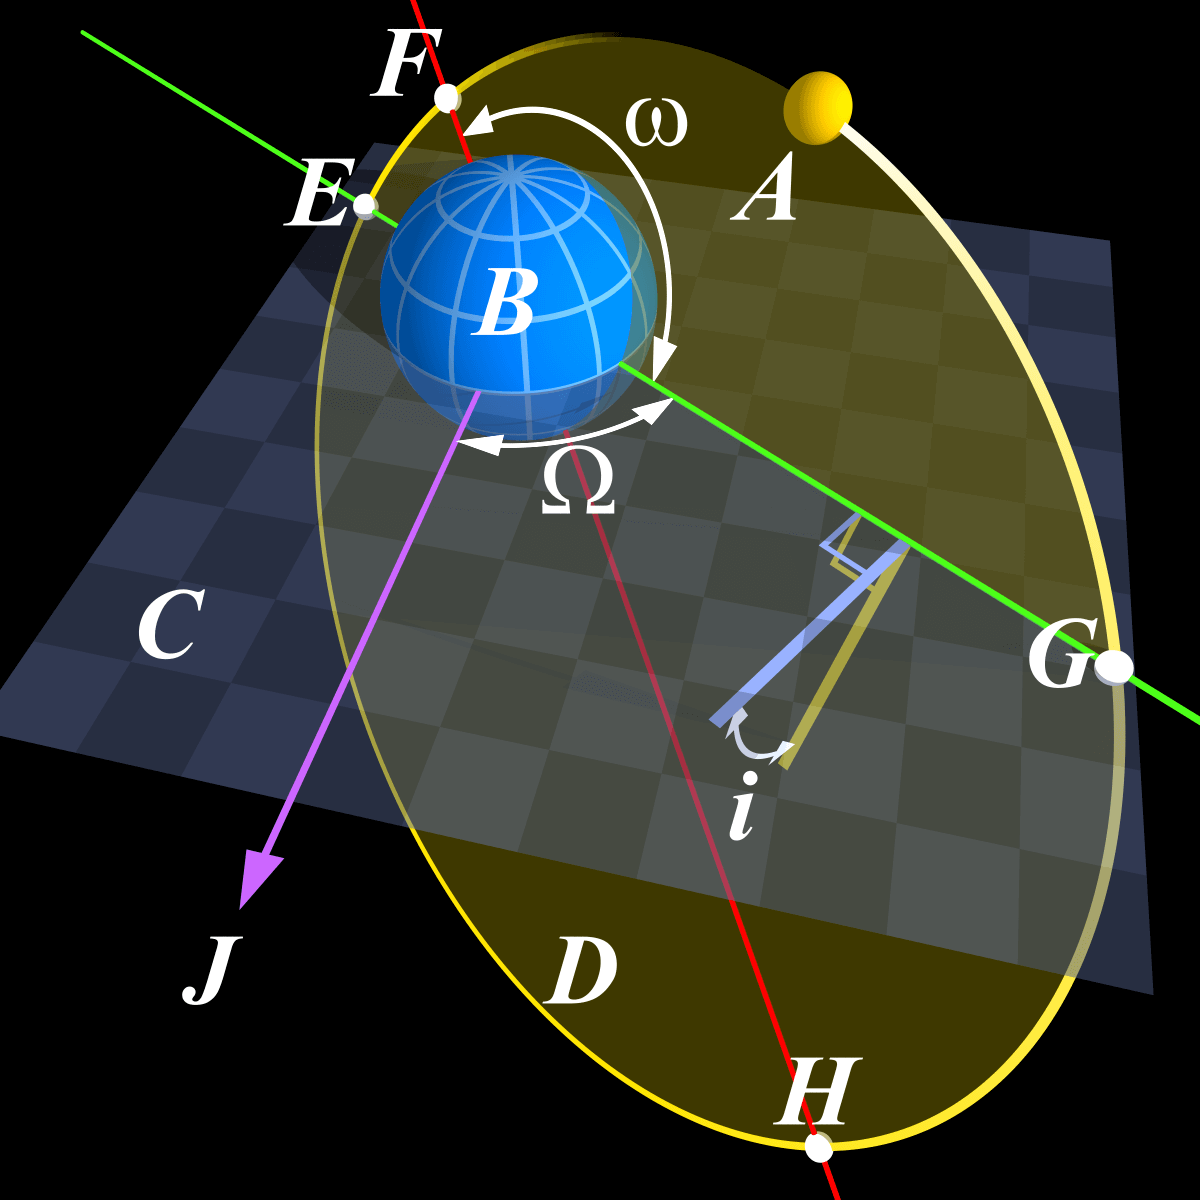 Figure showing orbital parameters, created by Peo~commonswiki and hosted on Wikimedia Commons